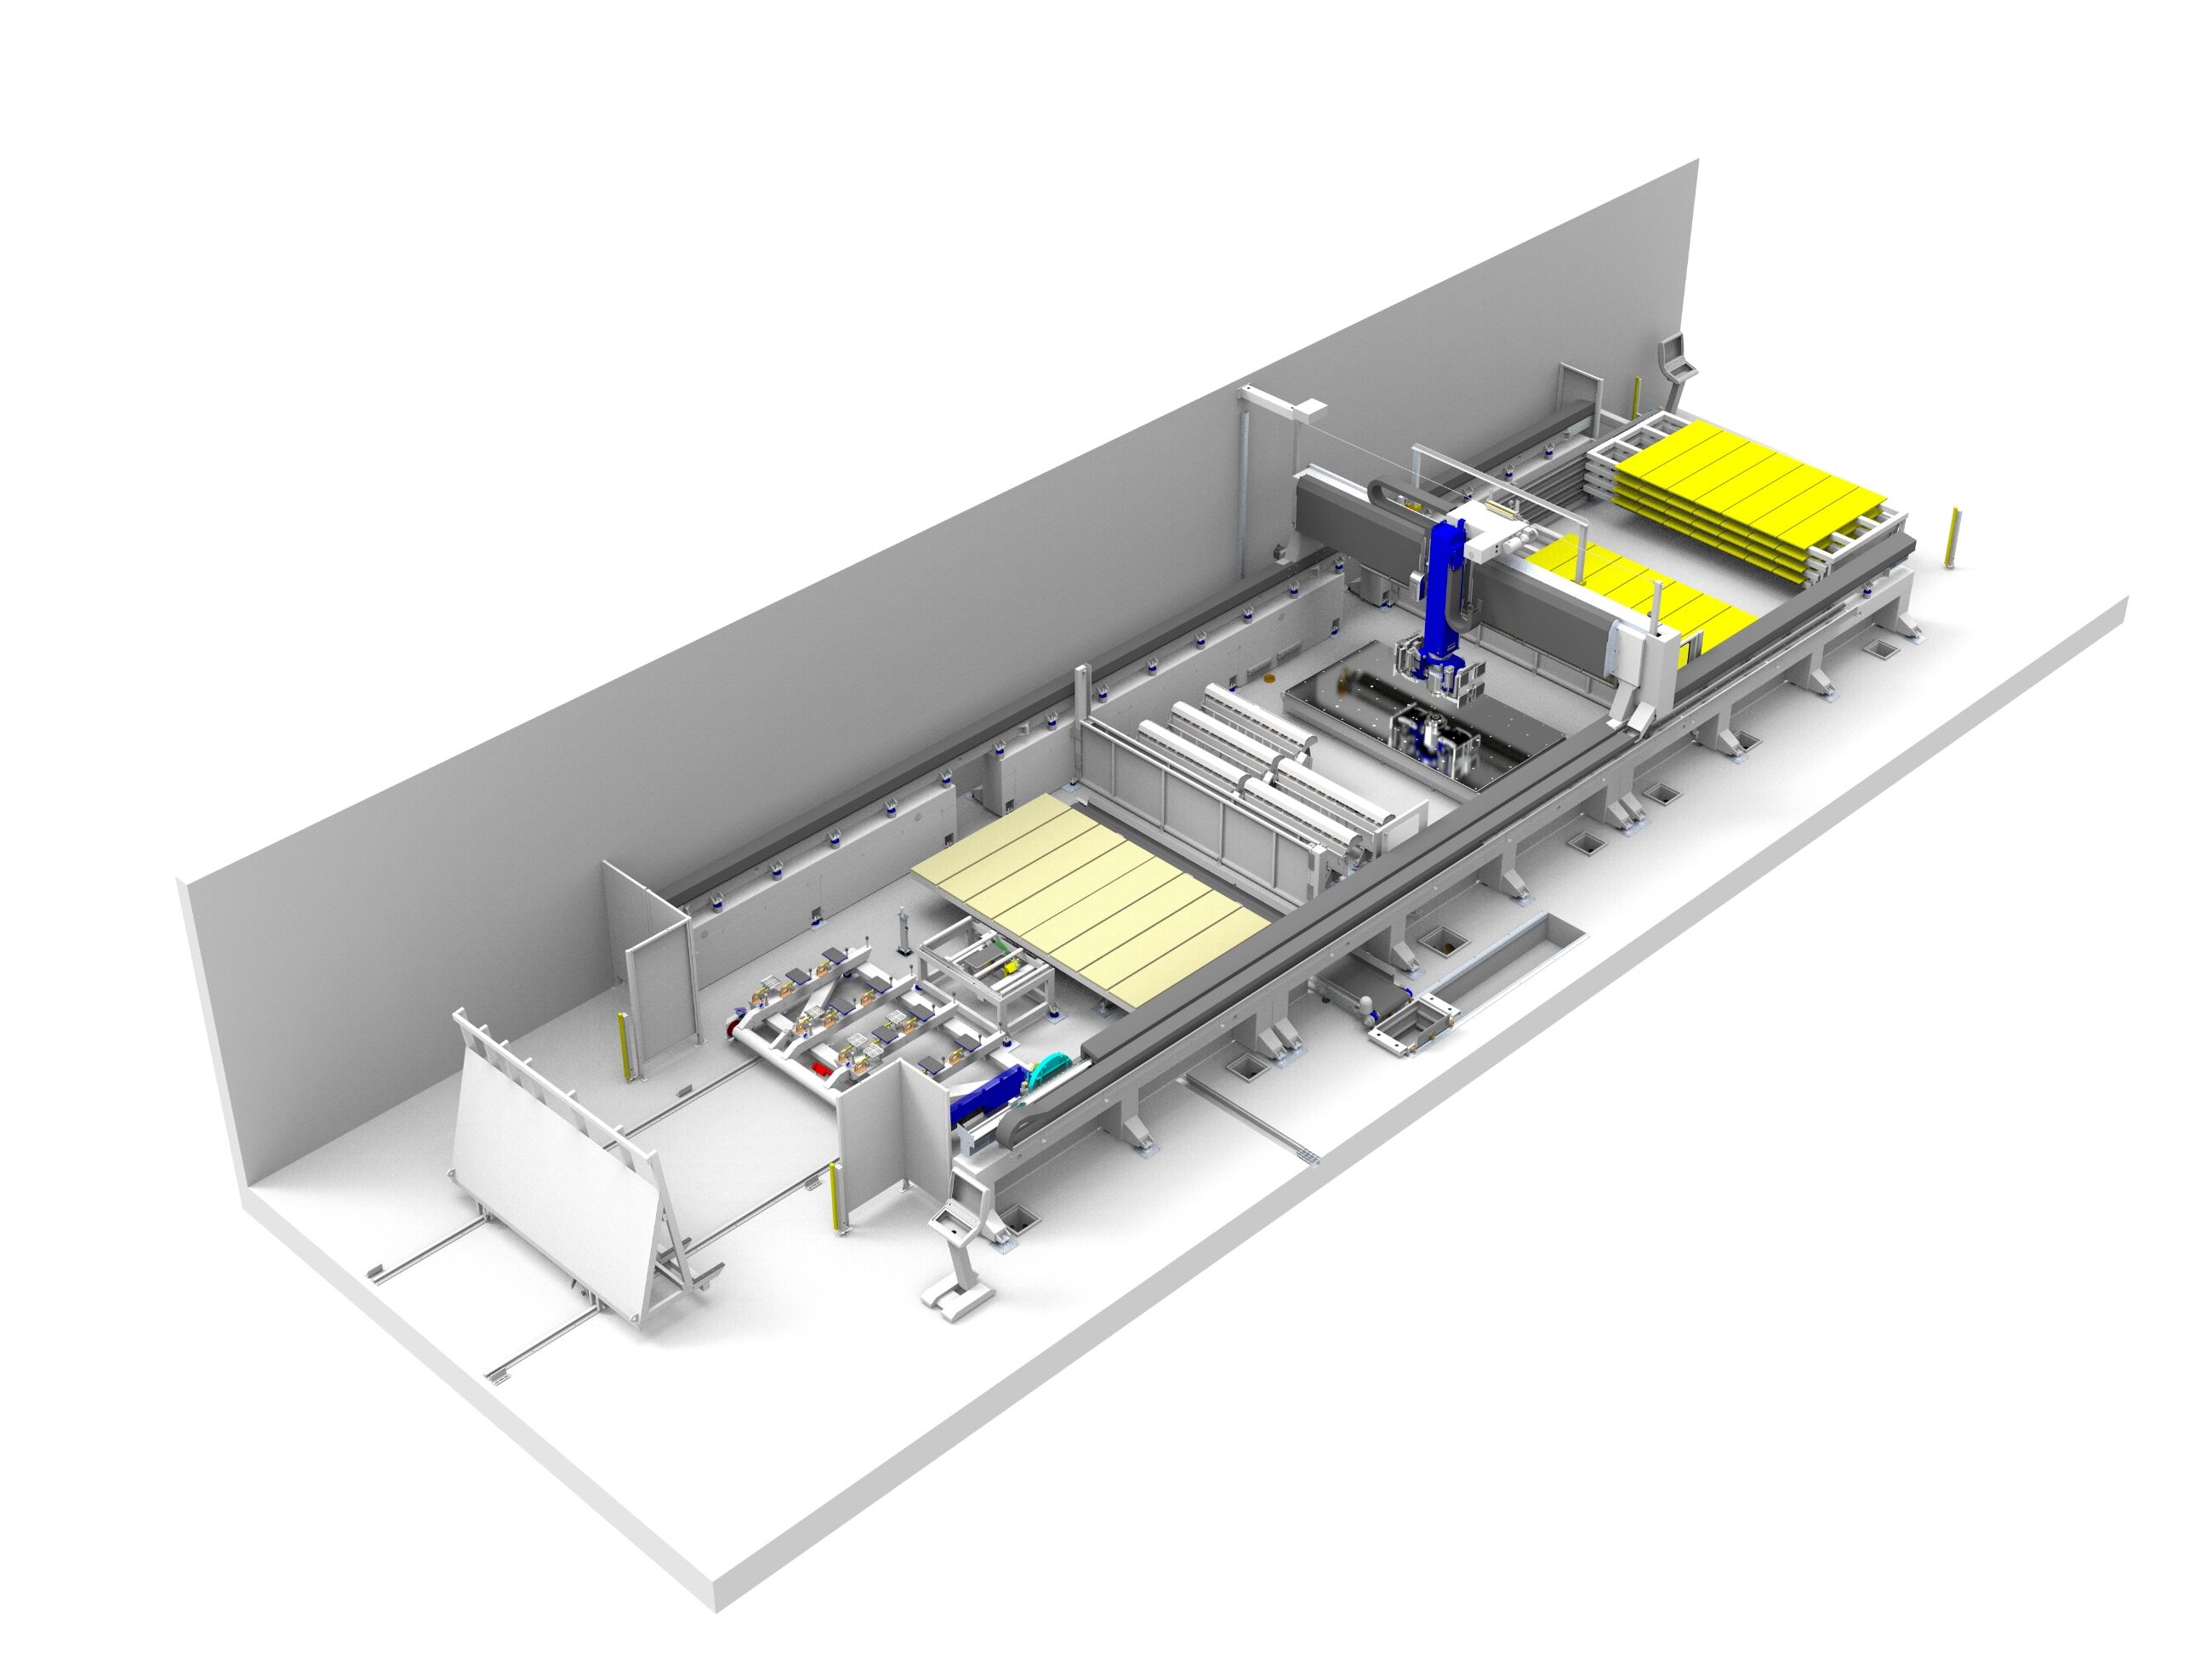 Automatic loading/unloading systems to never stop the cutting lines